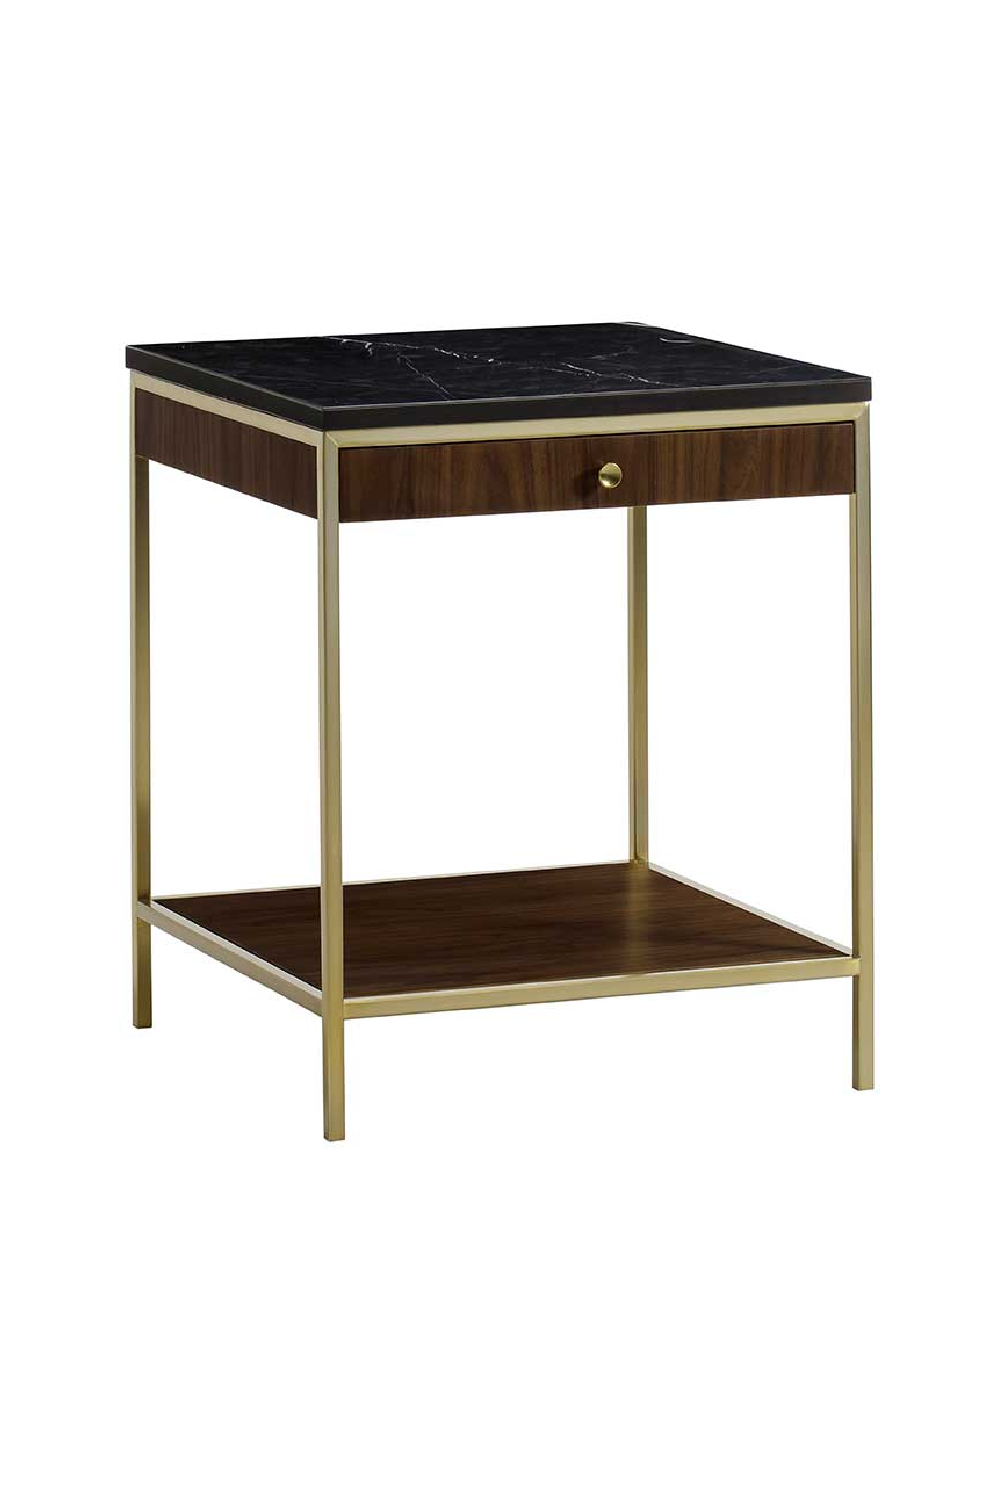 Black Marble Top Square Side Table S | Andrew Martin Chester | Oroa.com